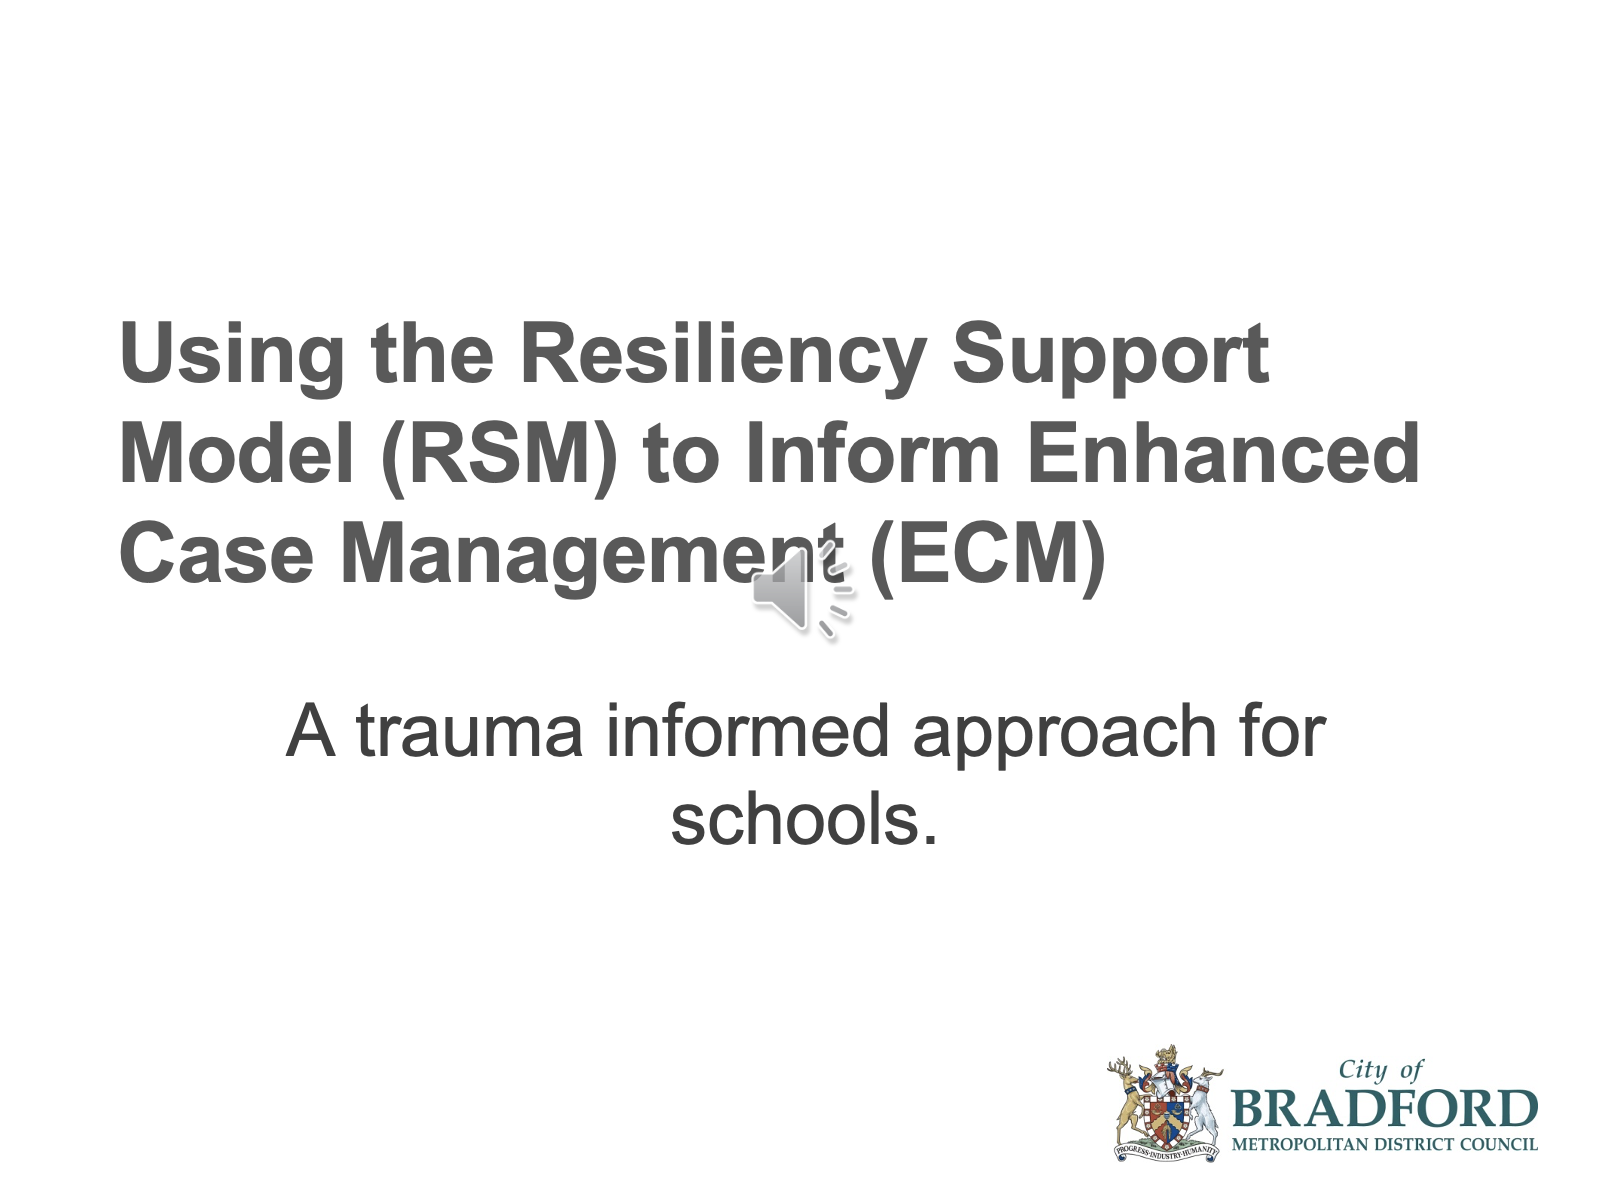 Using the Resilience Support Model (RSM) to Inform Enhanced Case Management (ECM). A trauma informed approach for schools